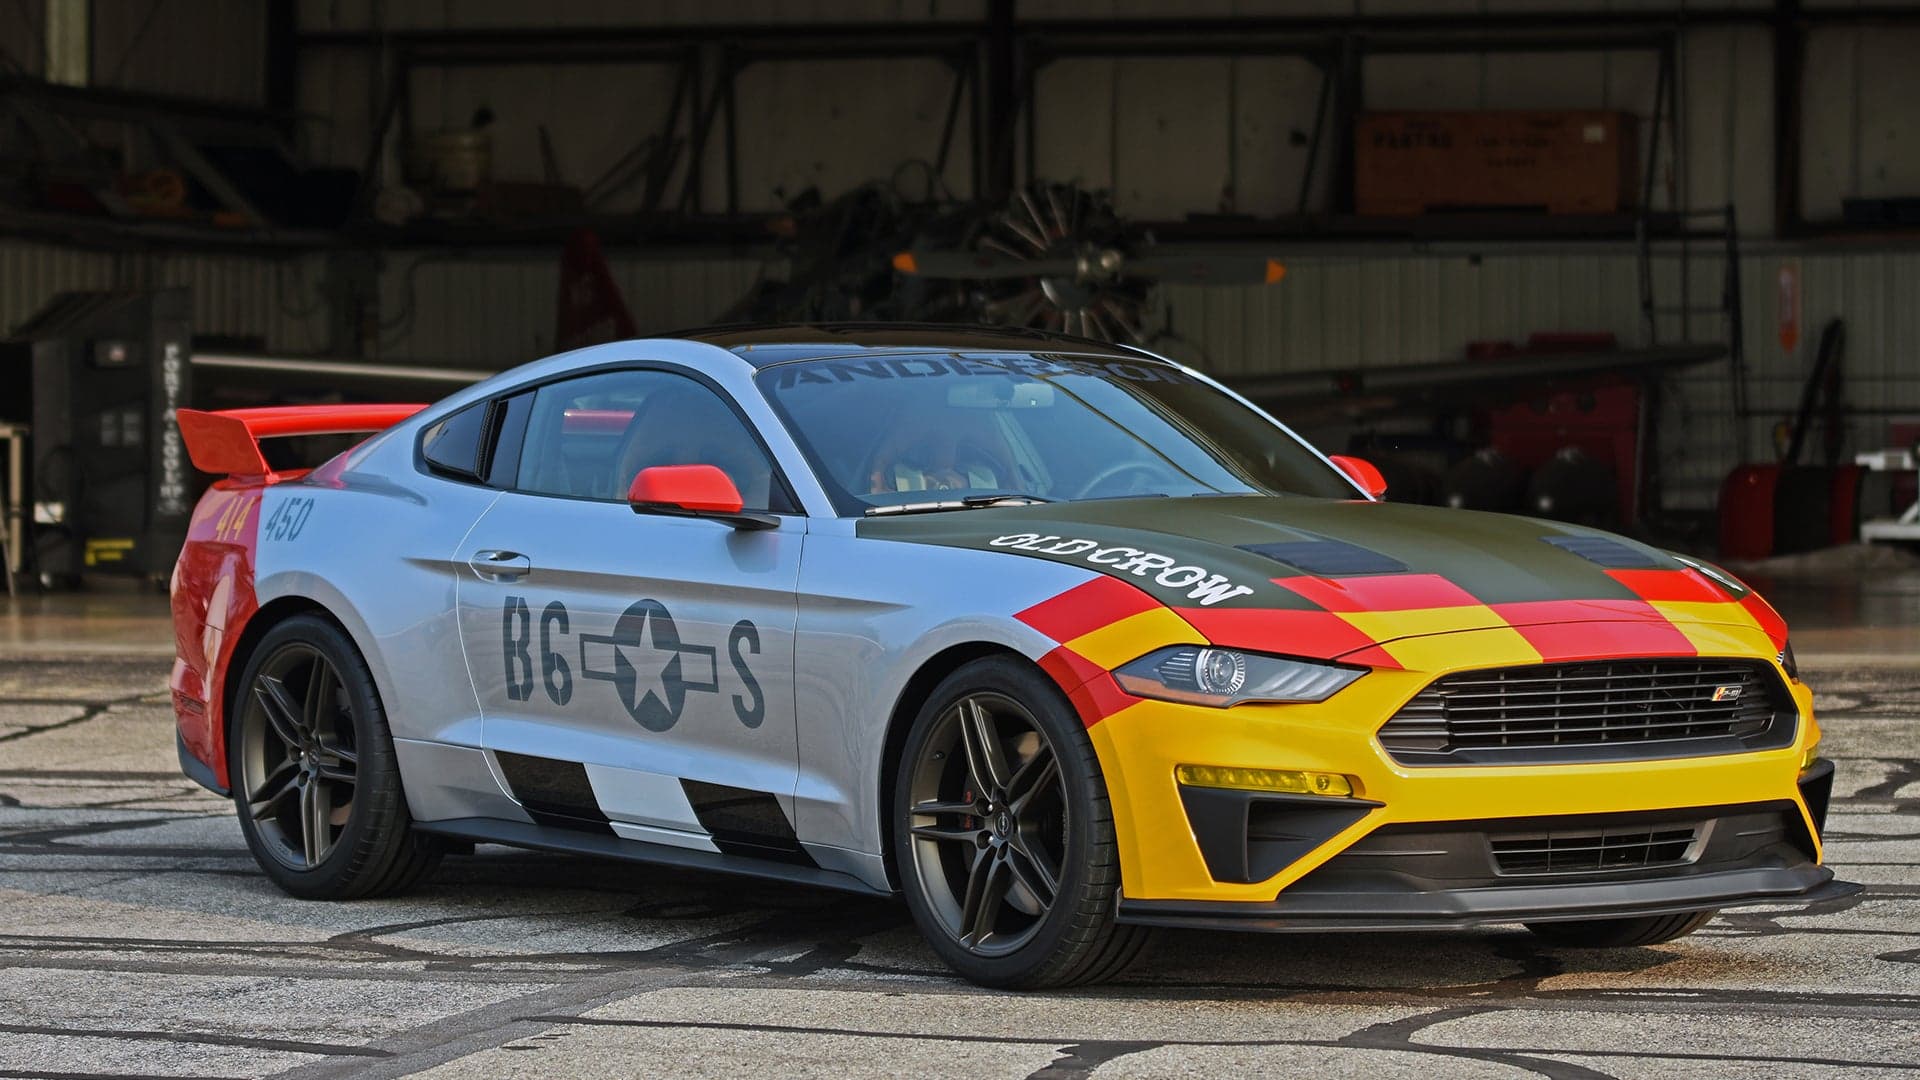 P-51-Inspired Ford Mustang GT ‘Old Crow’ Sells for Staggering $400,000 at Auction